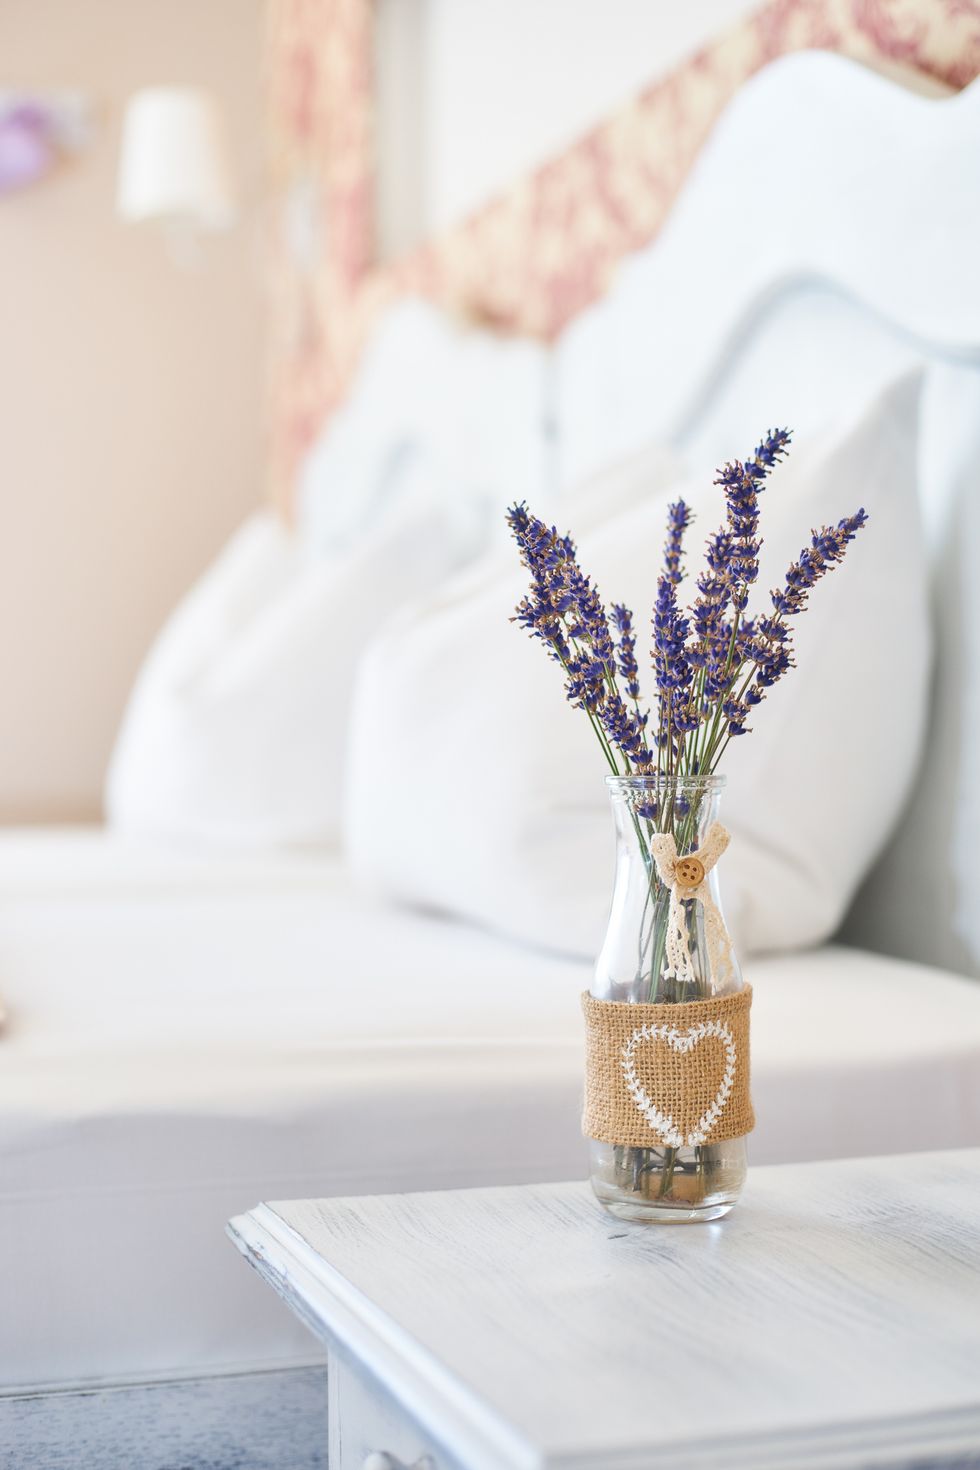 15 of the best plants for your bedroom to help you get a better sleep